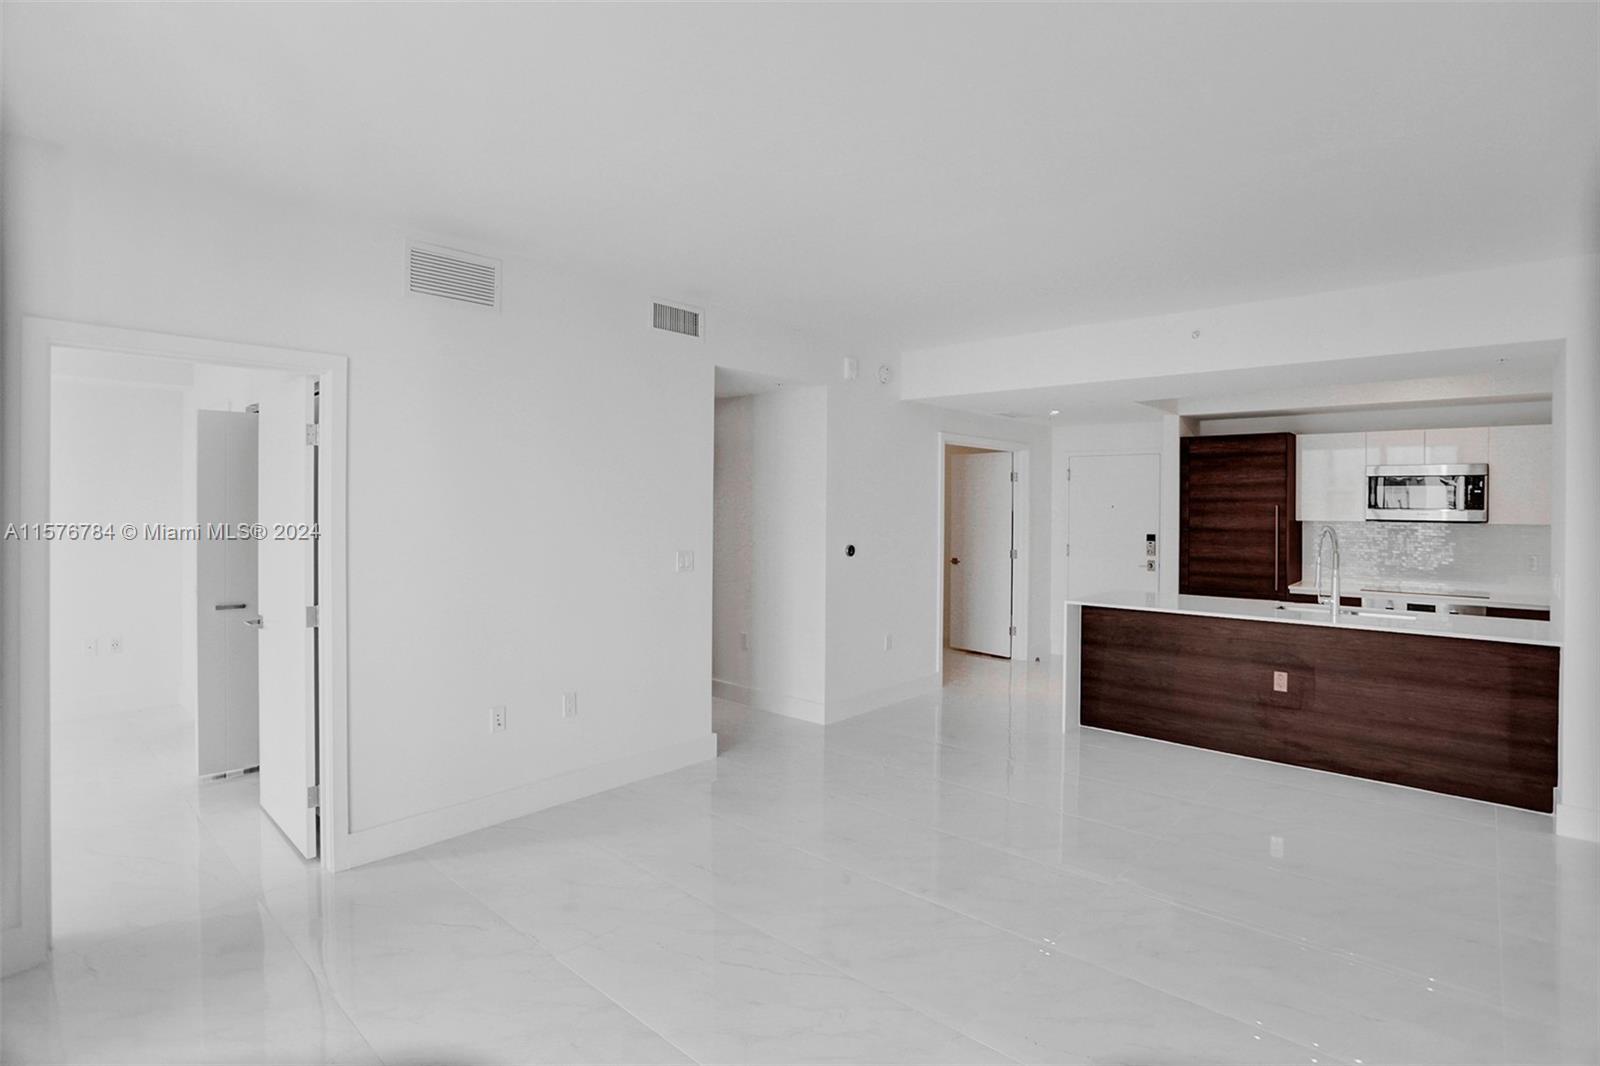 AVAILABLE NOW. SPACIOUS 1 BD+DEN/1 BA UNIT WITH GREAT VIEWS. Live in the premier new development of 